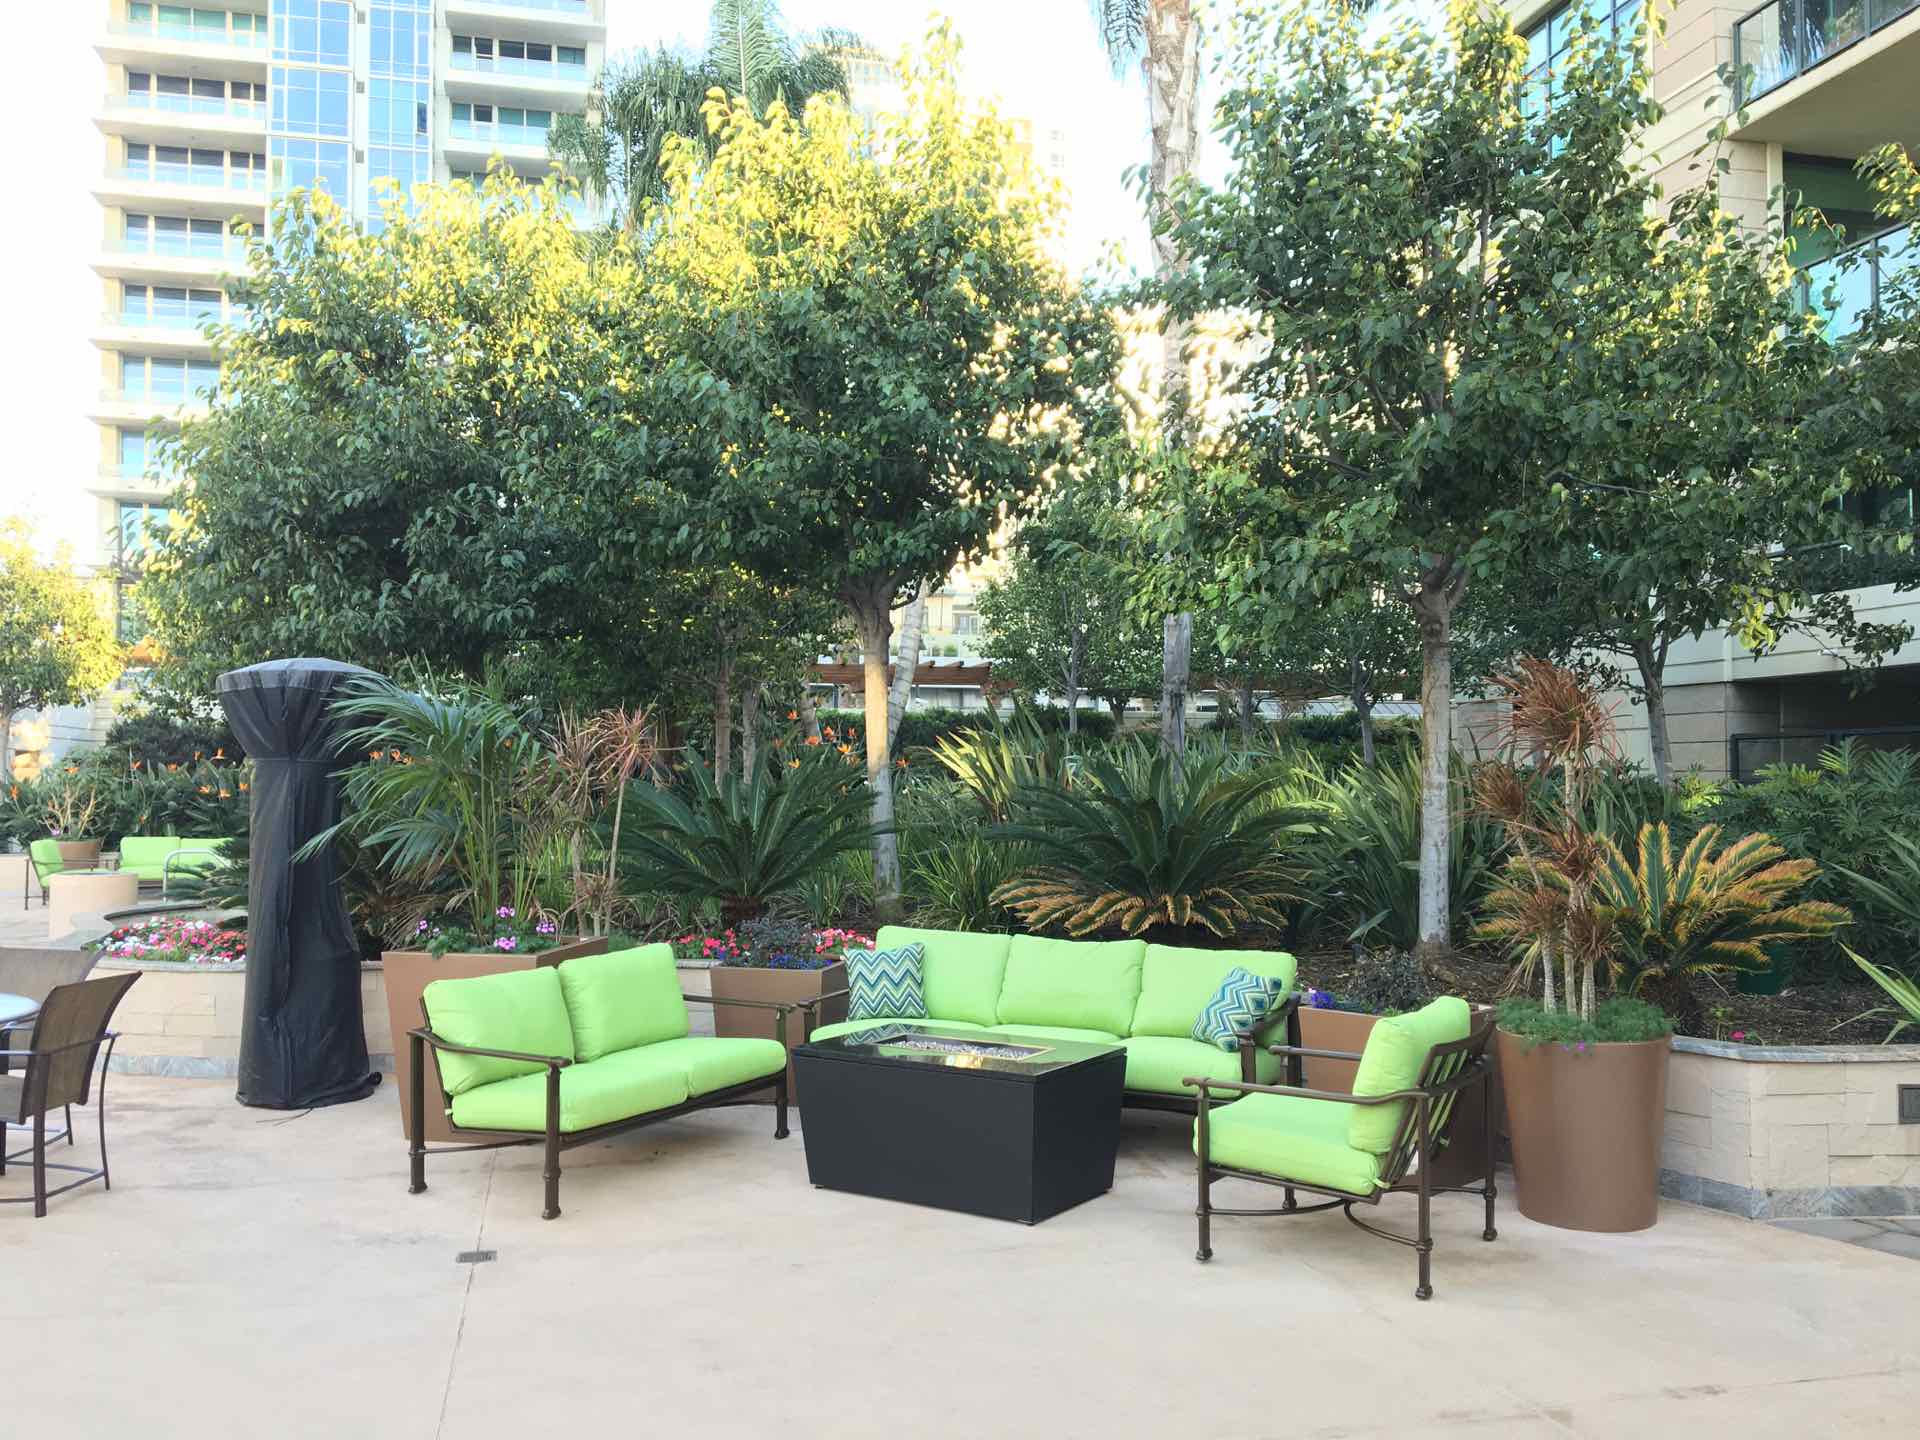 Outdoor seating lounge area in north tower